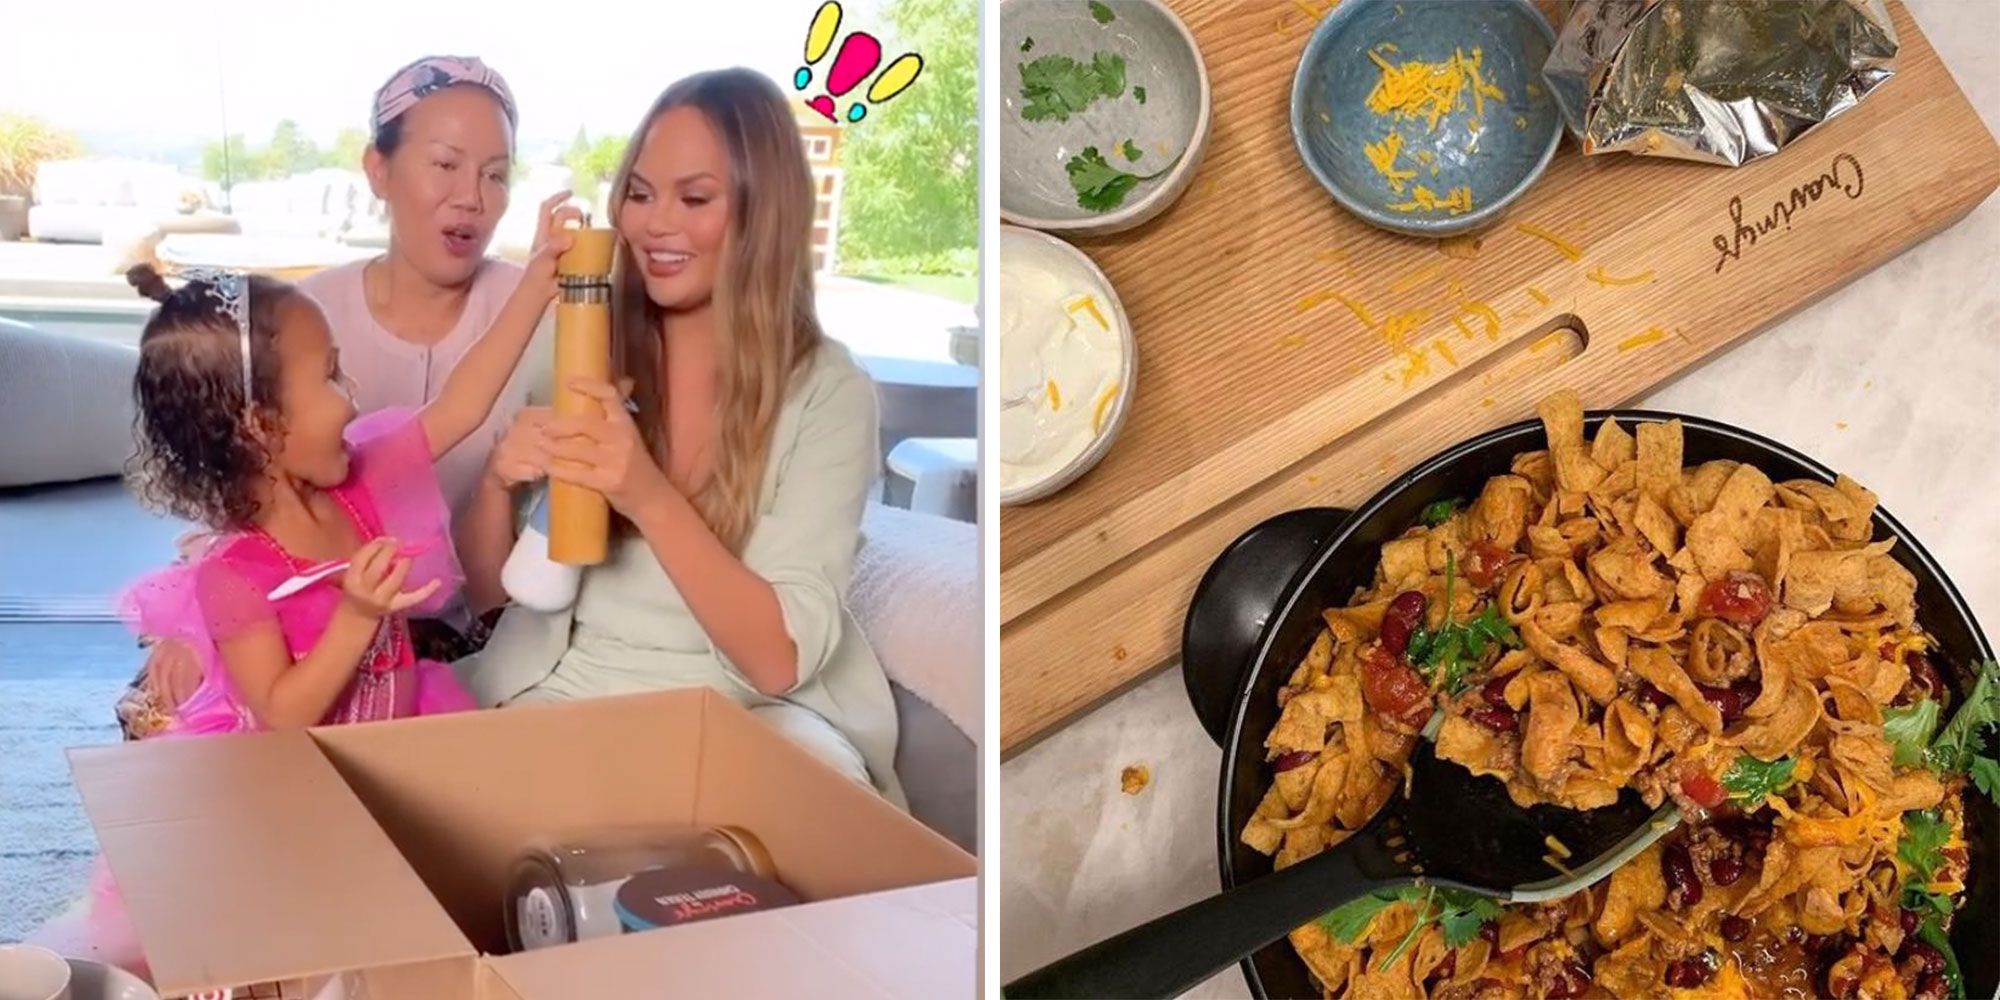 This Chrissy Teigen Cooking Set Is 80 Percent Off For Black Friday